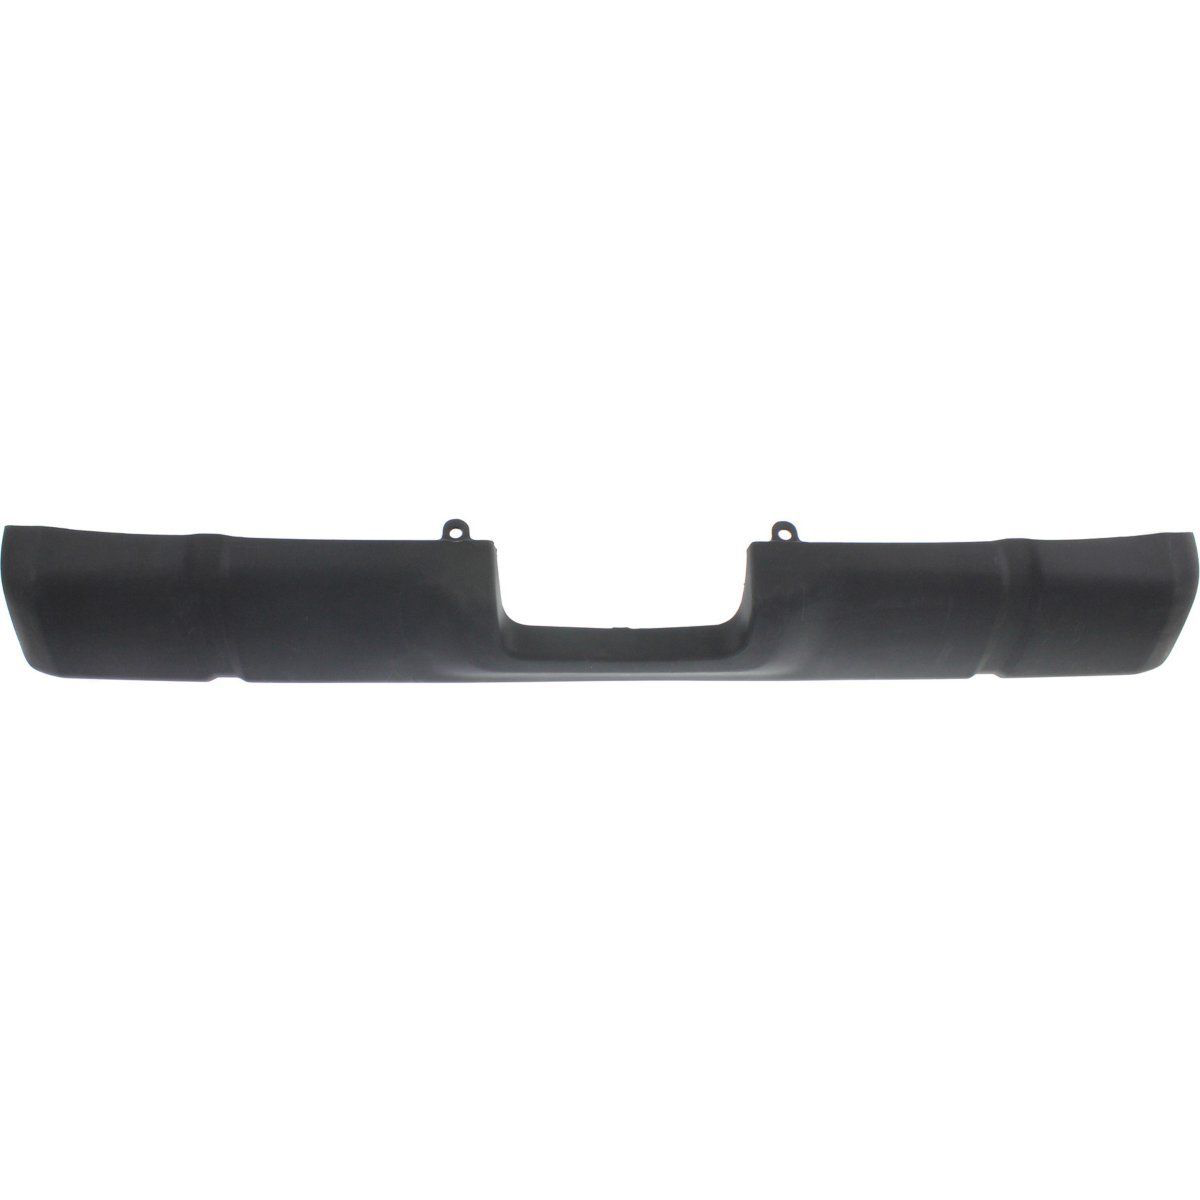 2010-2013 TOYOTA 4RUNNER Rear Bumper Cover Lower TRAIL  w/o Chrome Trim Painted to Match